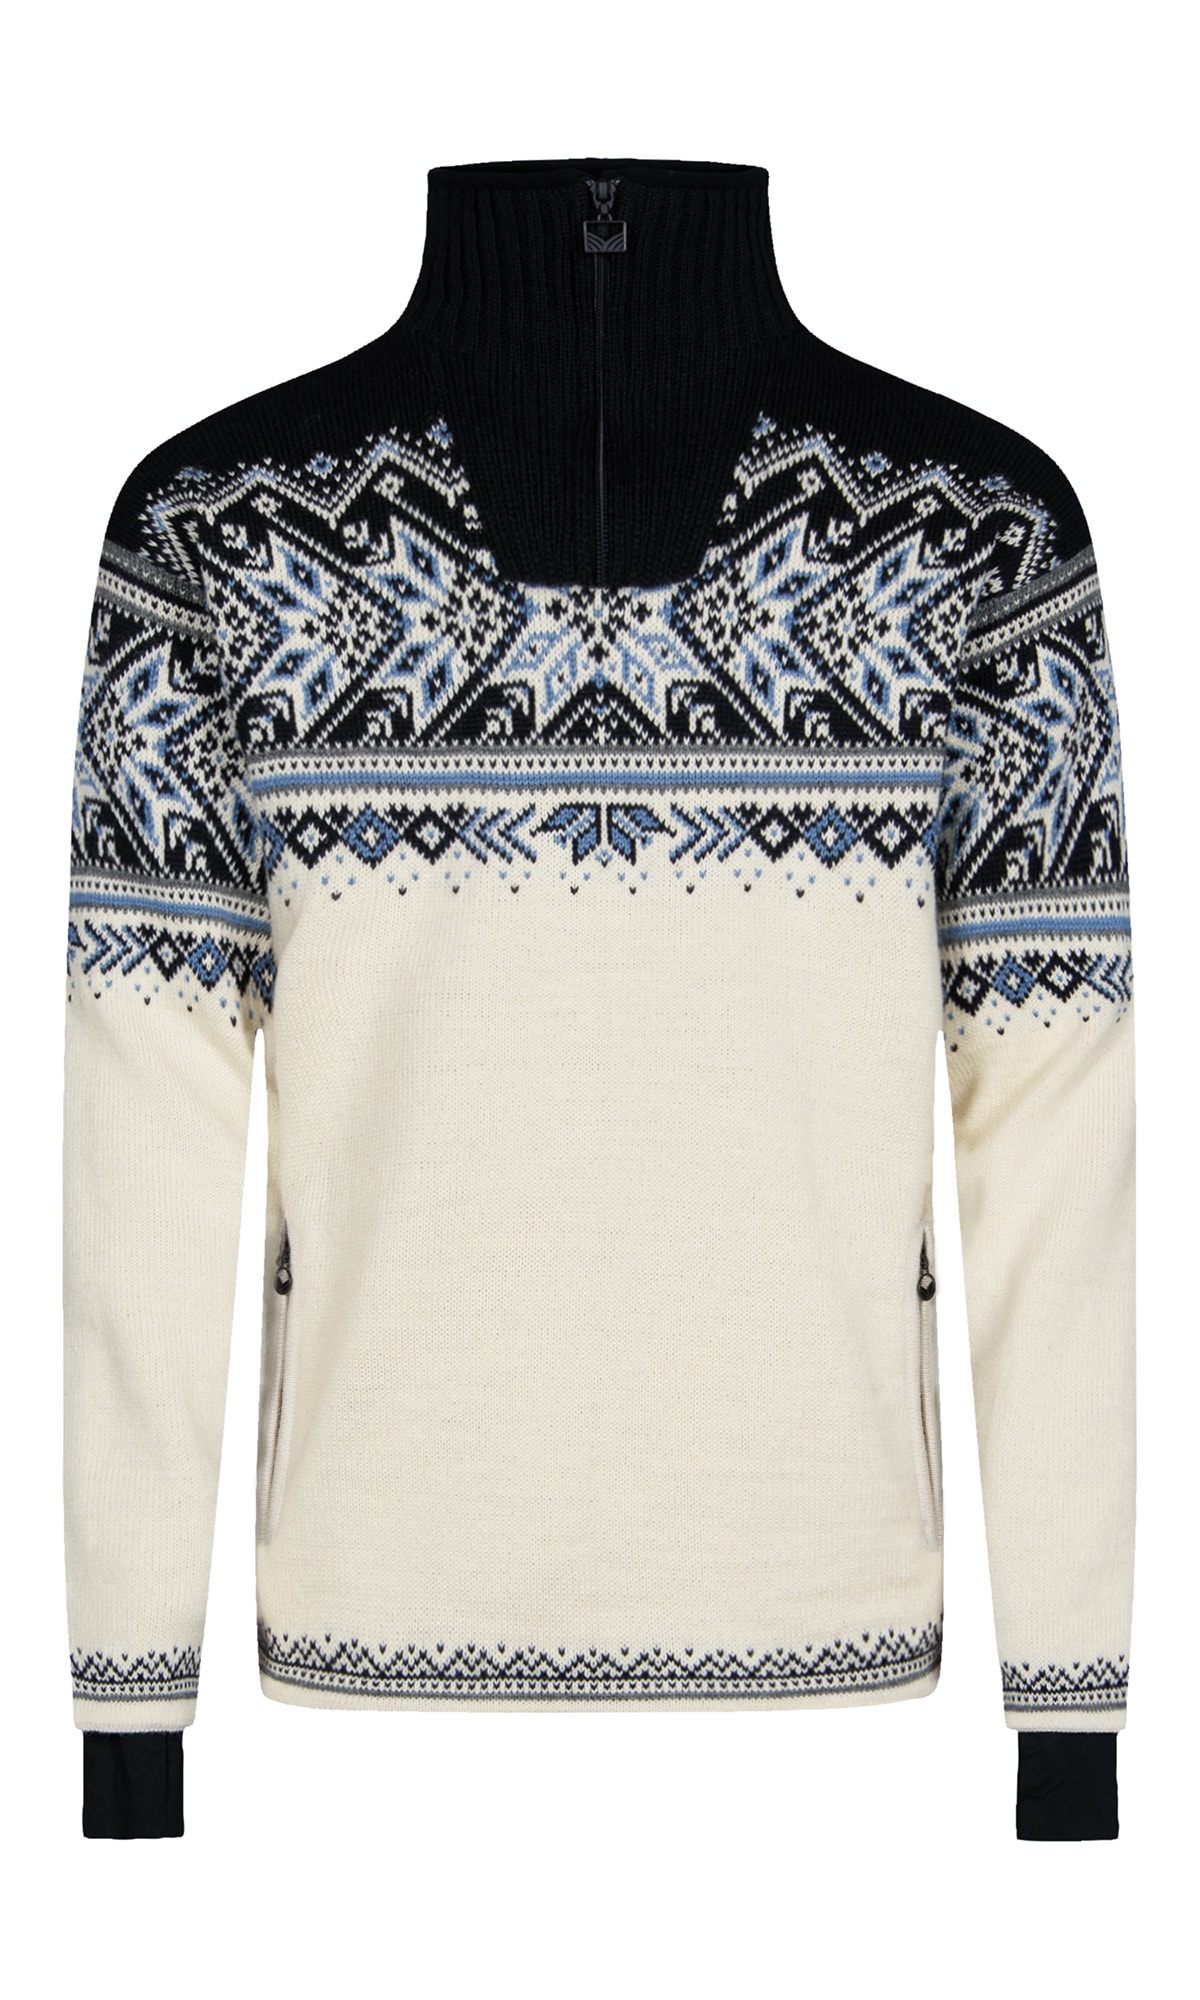 - Sweater Norway Men of Weatherproof Offwhite Dale - Vail - of - Norway Dale